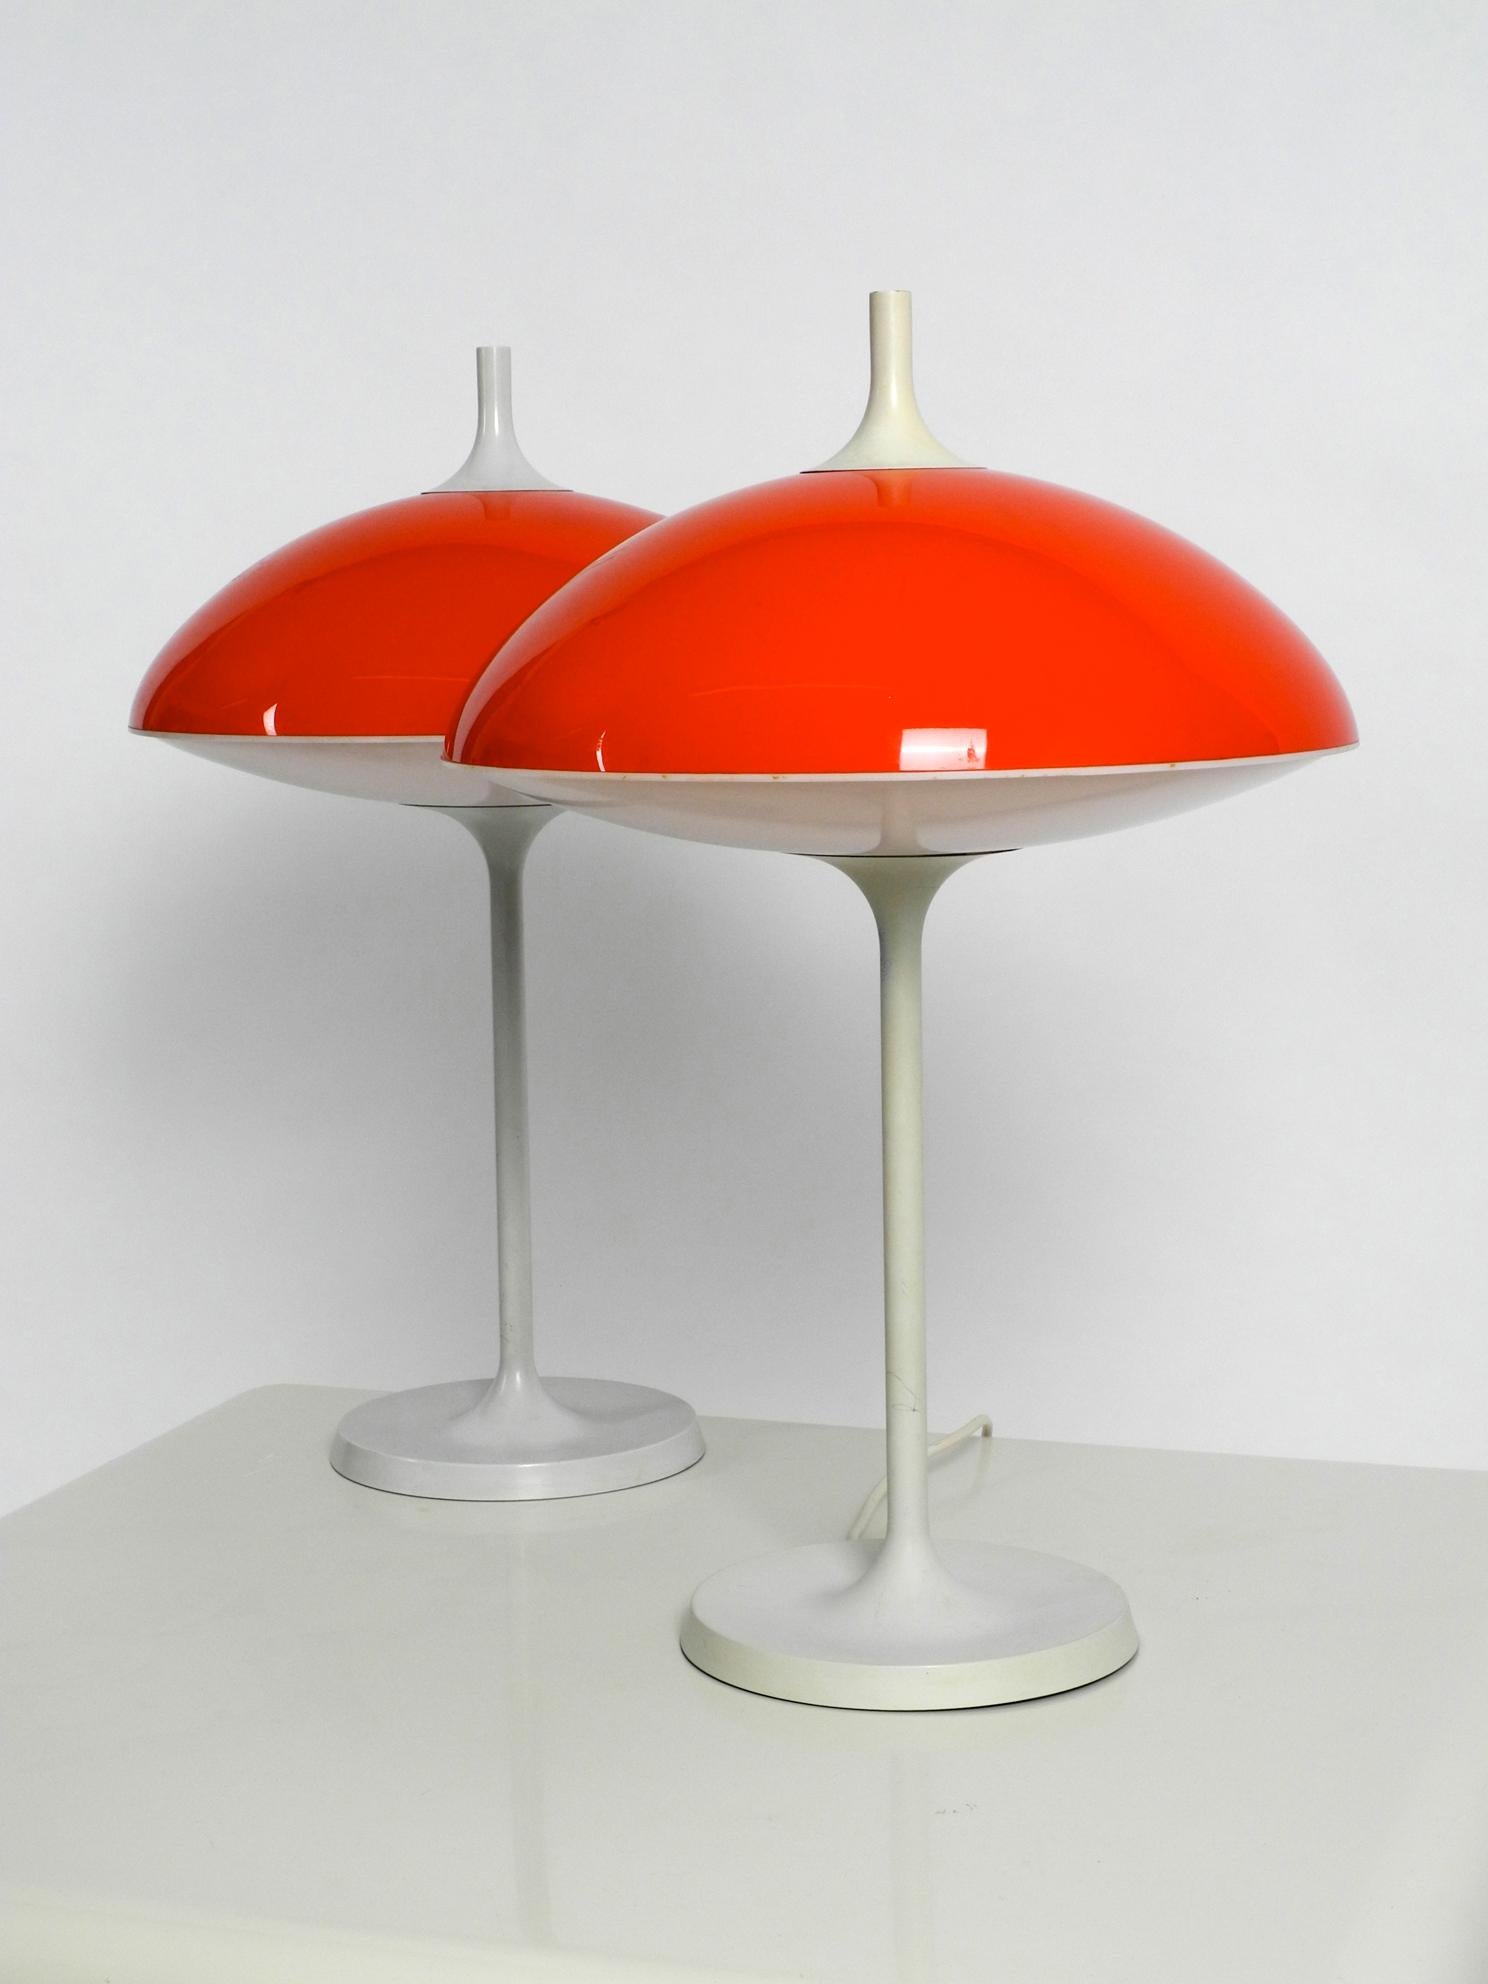 Pair of exceptional large 1960s Temde table lamp.
Made in Switzerland. Great Minimalist Pop Art Space Age design.
Foot and neck made of heavy metal painted white.
Shade made of two parts, top in red below white.
Very nice pleasant glare-free